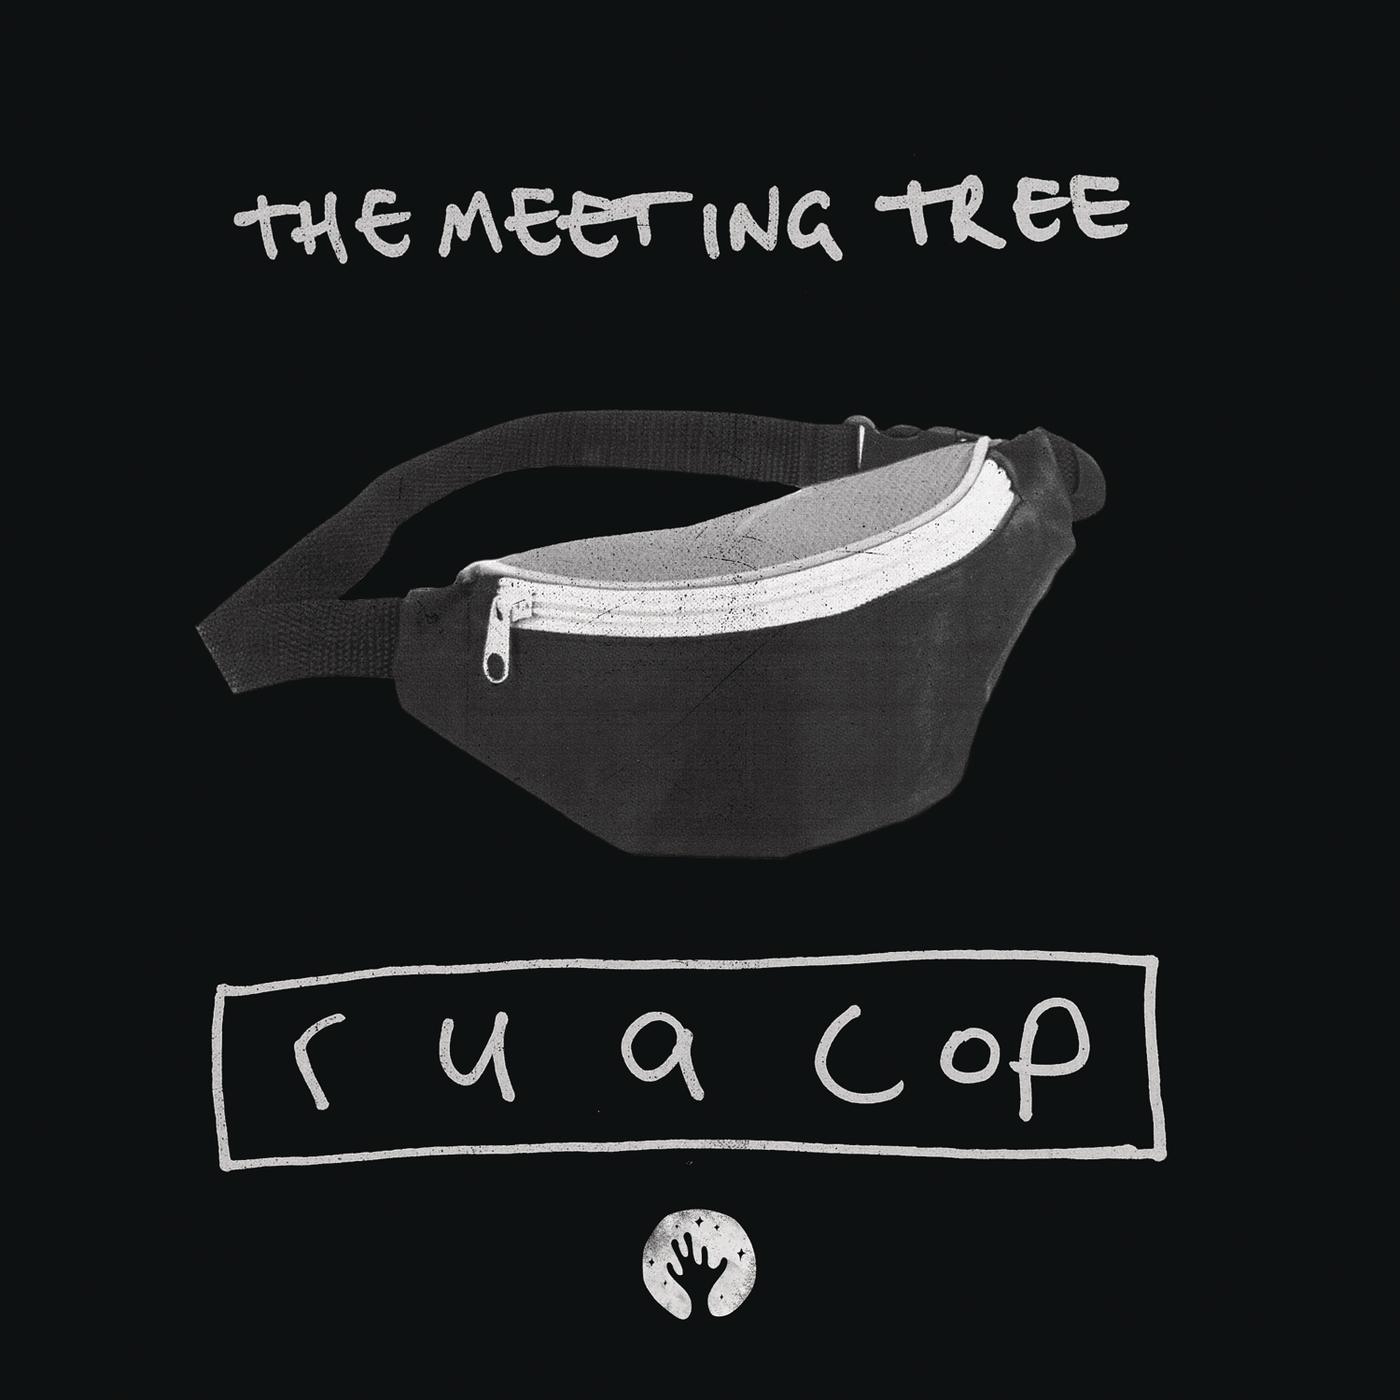 The Meeting Tree - First Place, Pt. 1